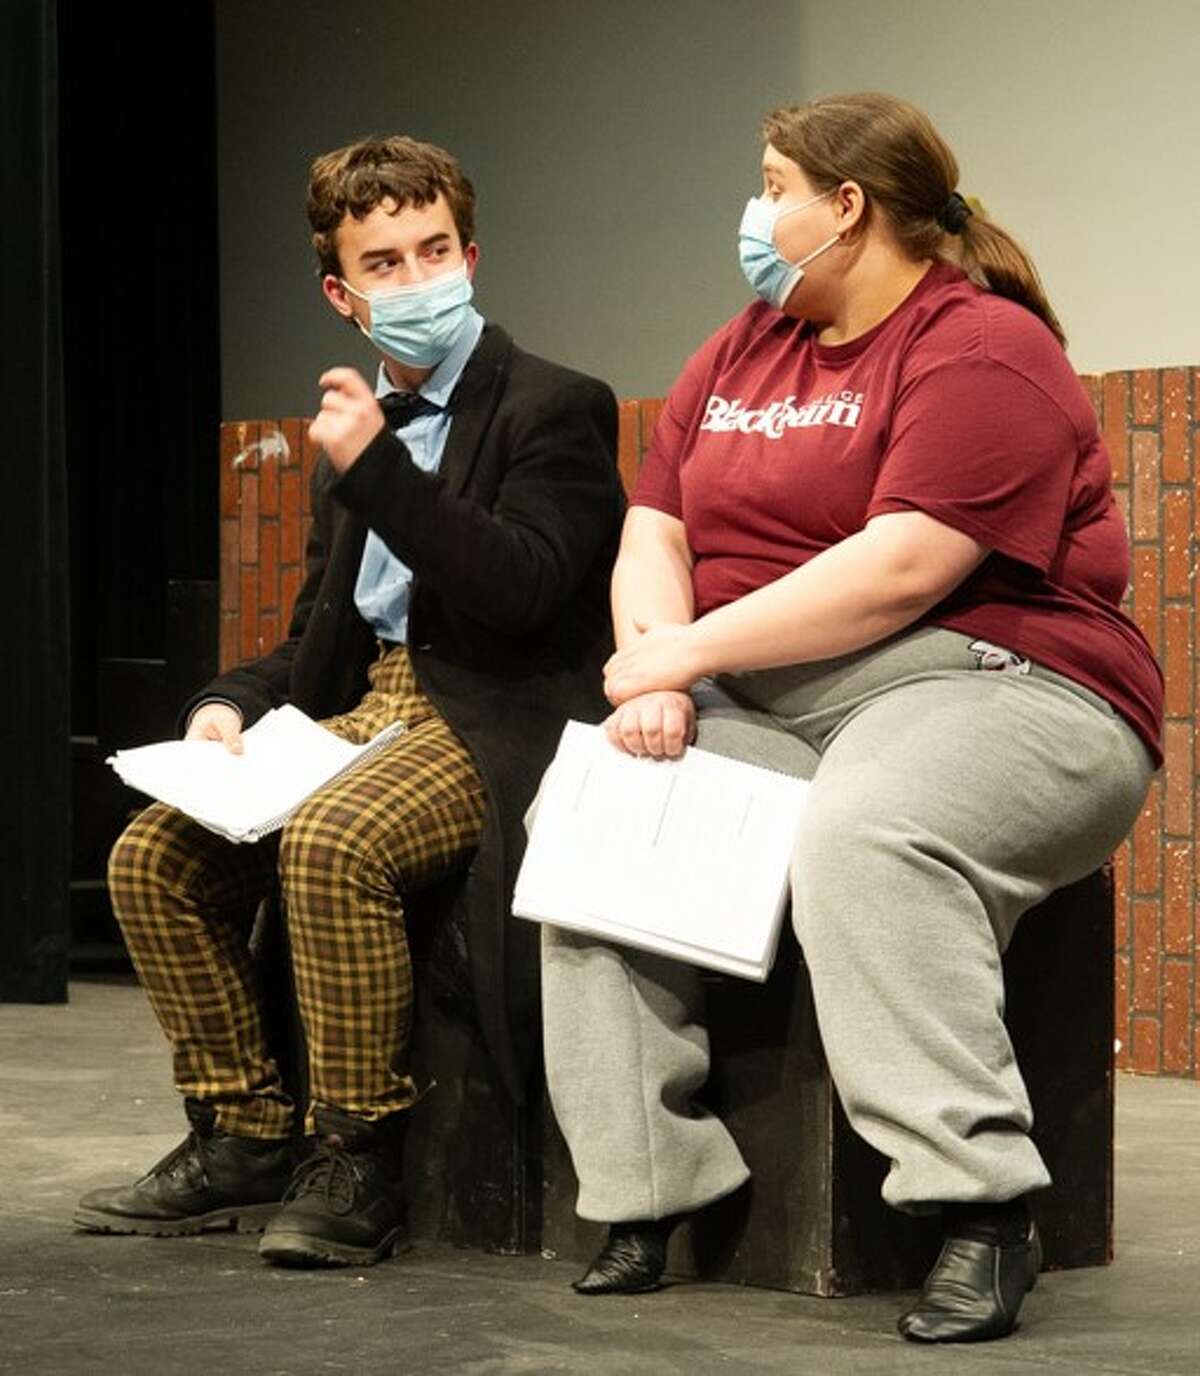 Kanyon Garrison, left, and Samantha Cox prepare for the Blackburn College Department of Music & Theatre's presentation of “You’re a Good Man, Charlie Brown” in Bothwell Auditorium March 31-April 2.